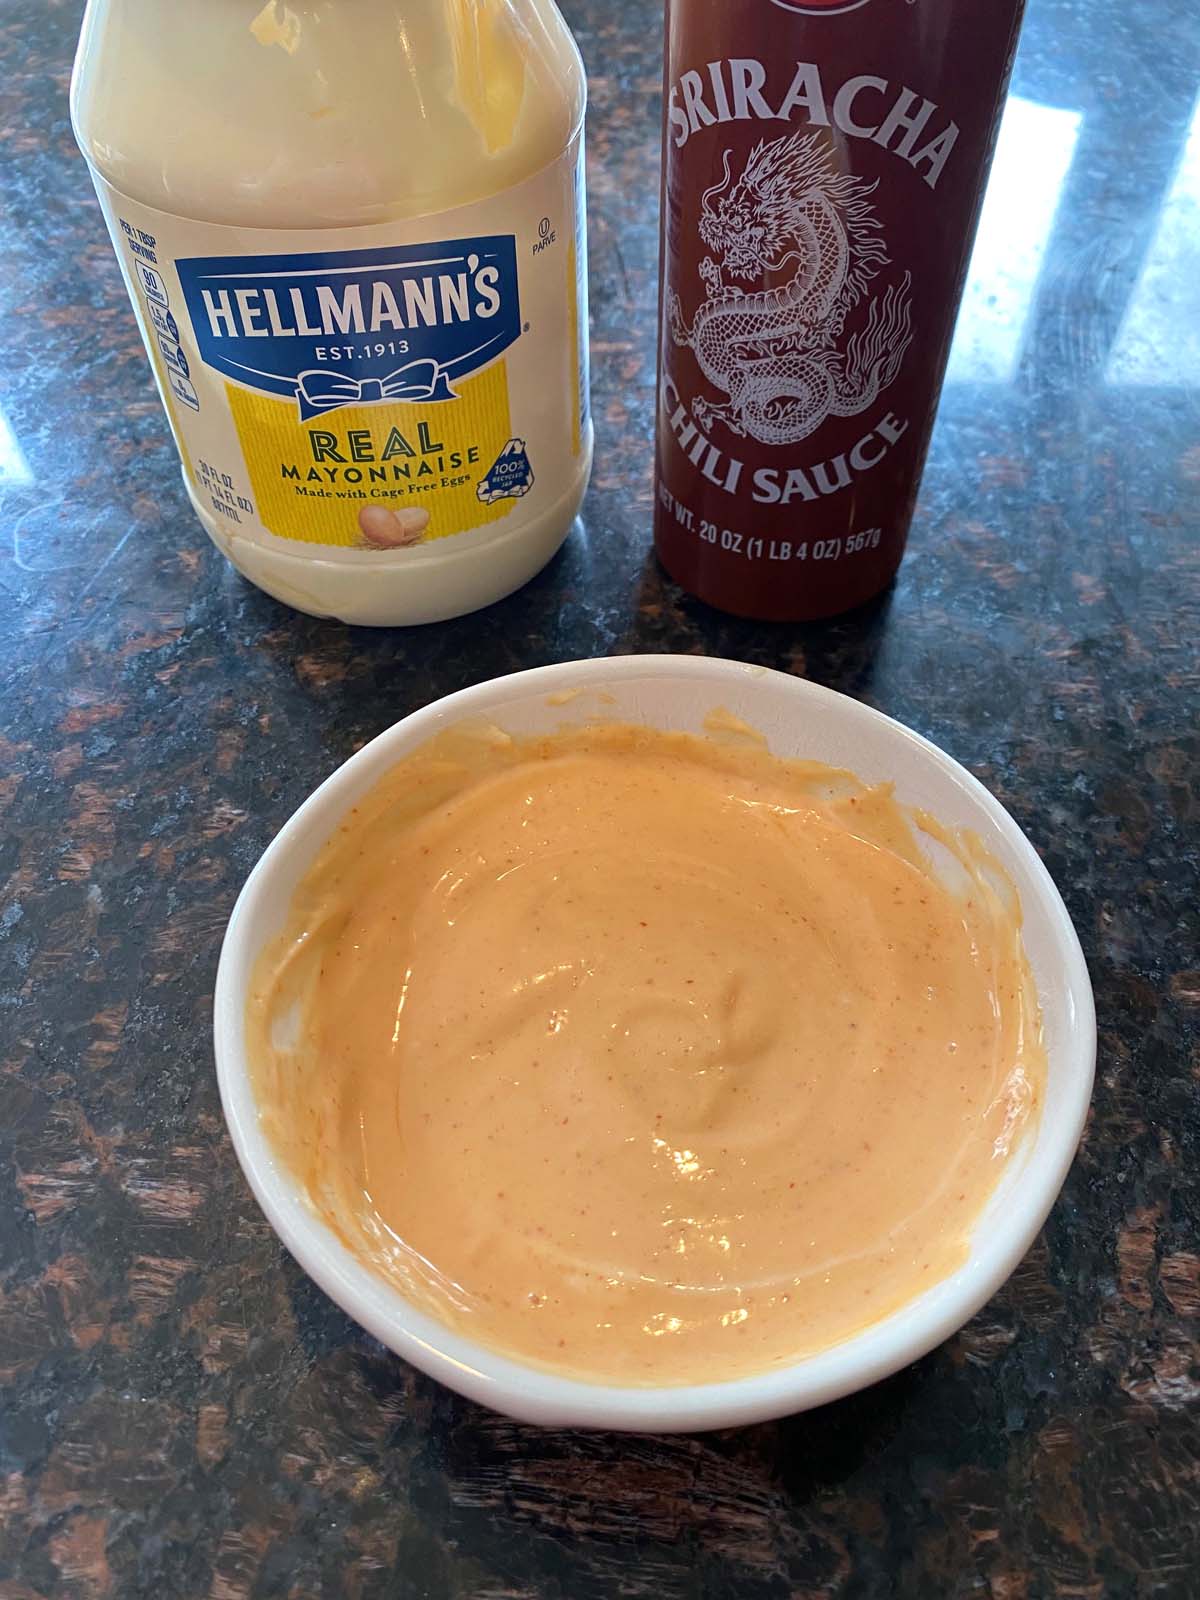 Sriracha spicy mayo in a white bowl with a bottle of sriracha and a jar of mayo.